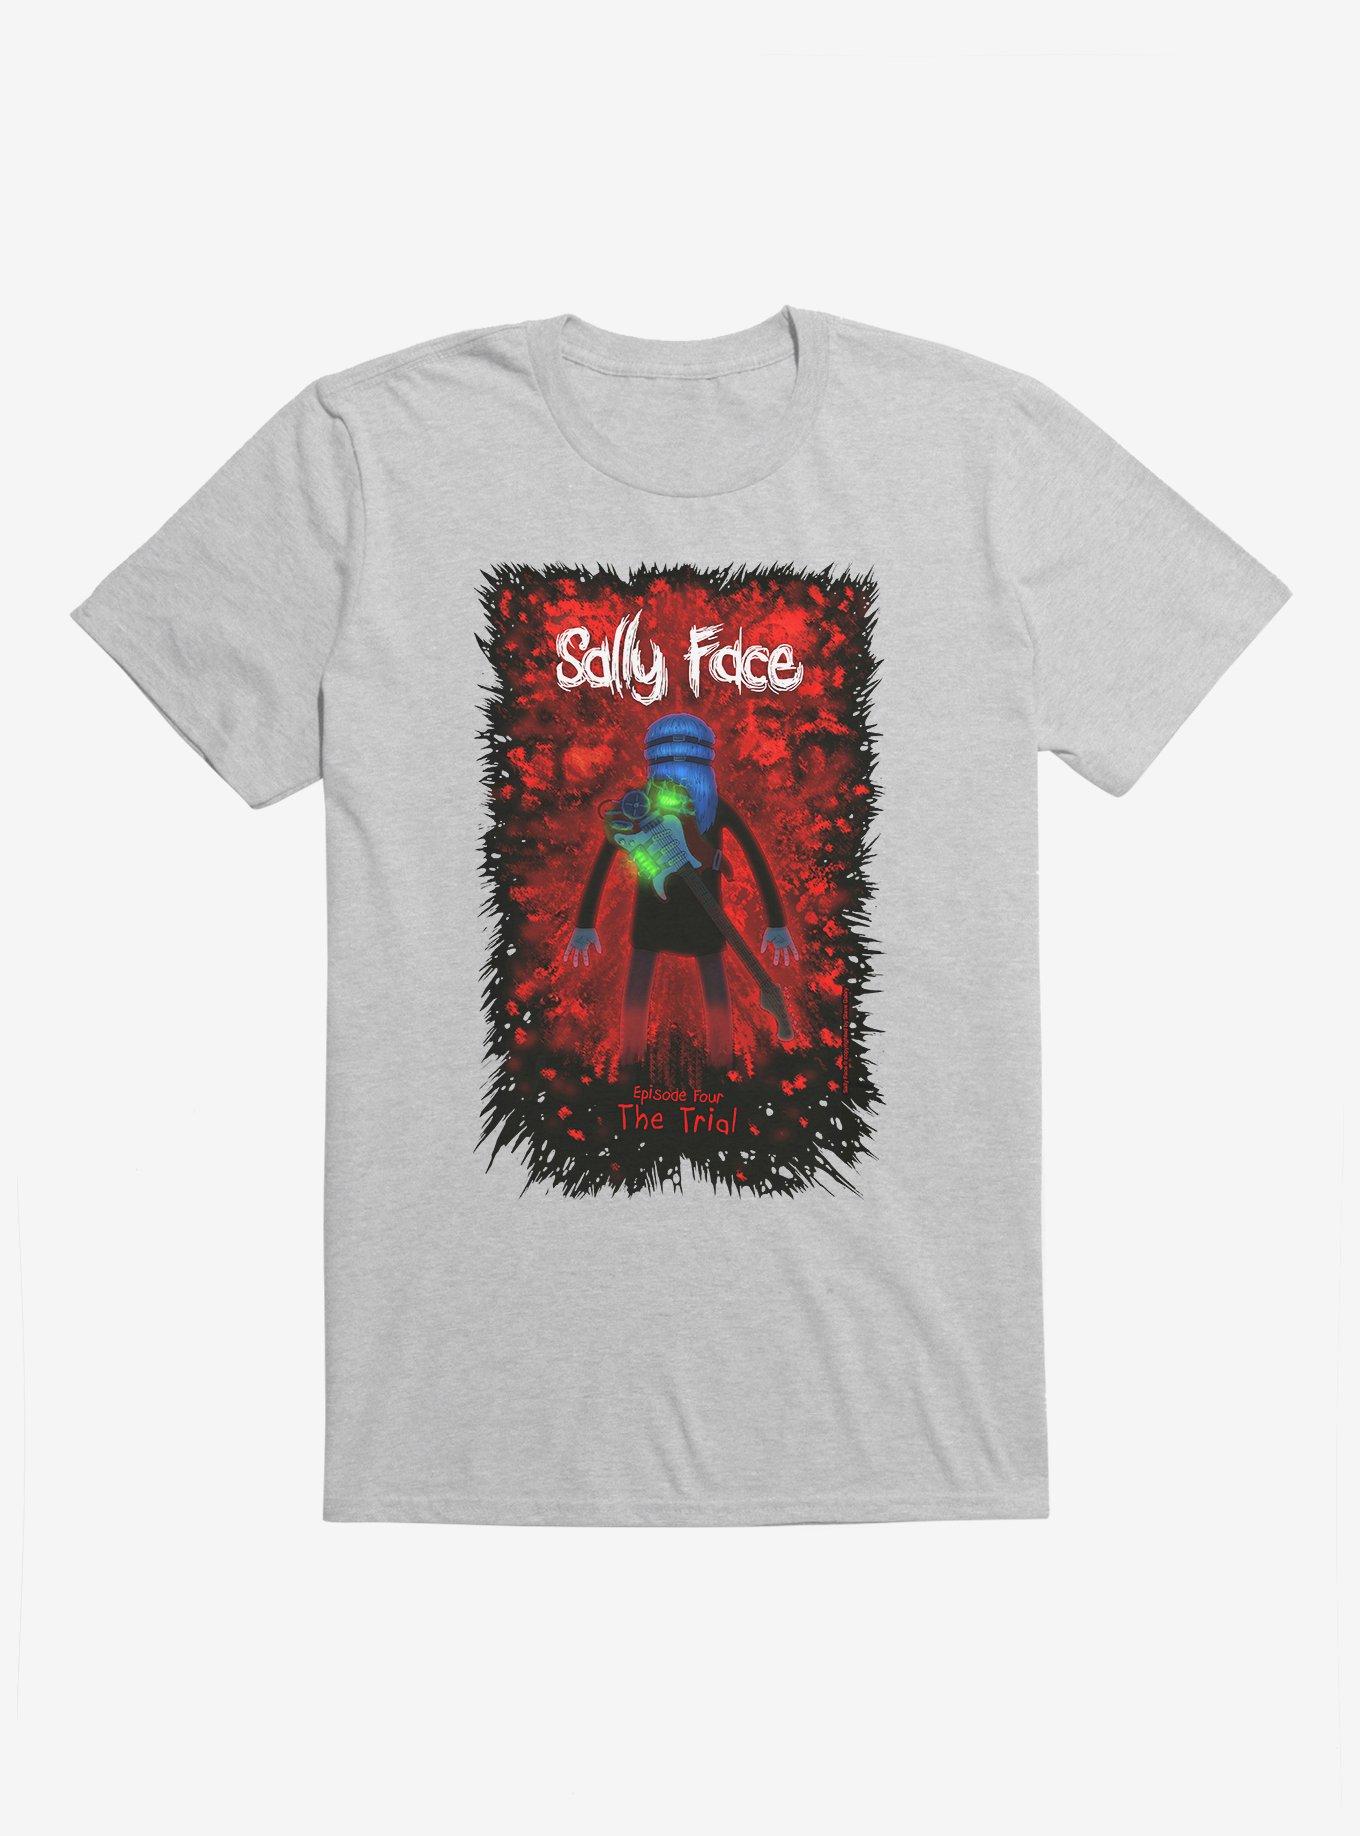 Sally Face Episode Four: The Trial T-Shirt, HEATHER GREY, hi-res